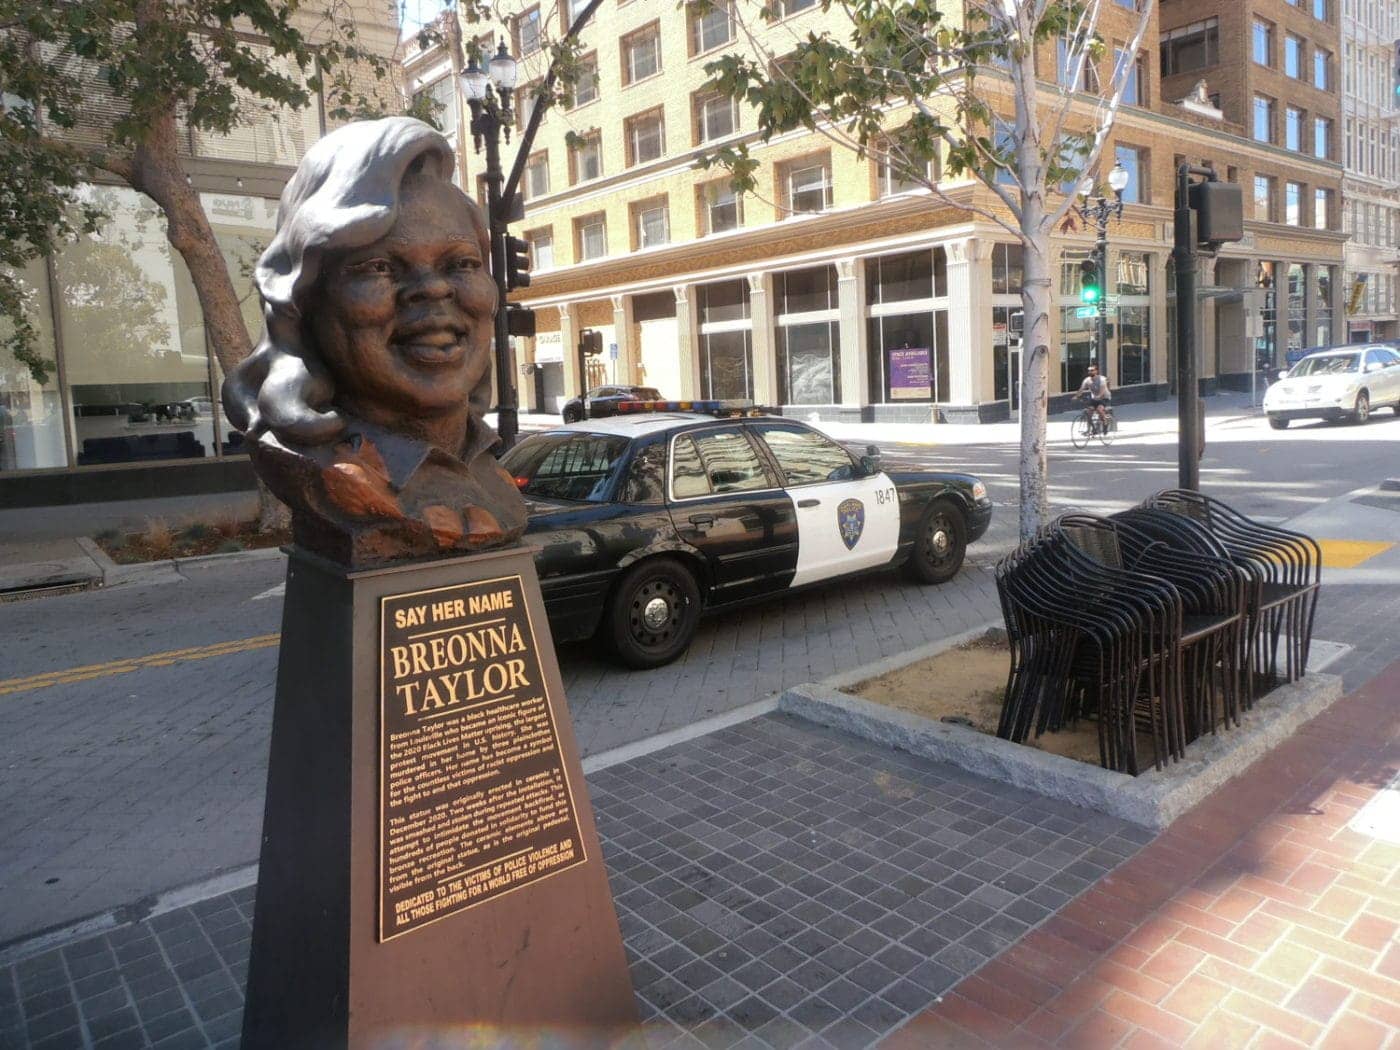 Artist-Leo-Carsons-new-bust-of-Breonna-Taylor-in-Oakland-by-Jahahara-2022-1400x1050, No mourning the criminal imperial(ist) monarchies!, Culture Currents 